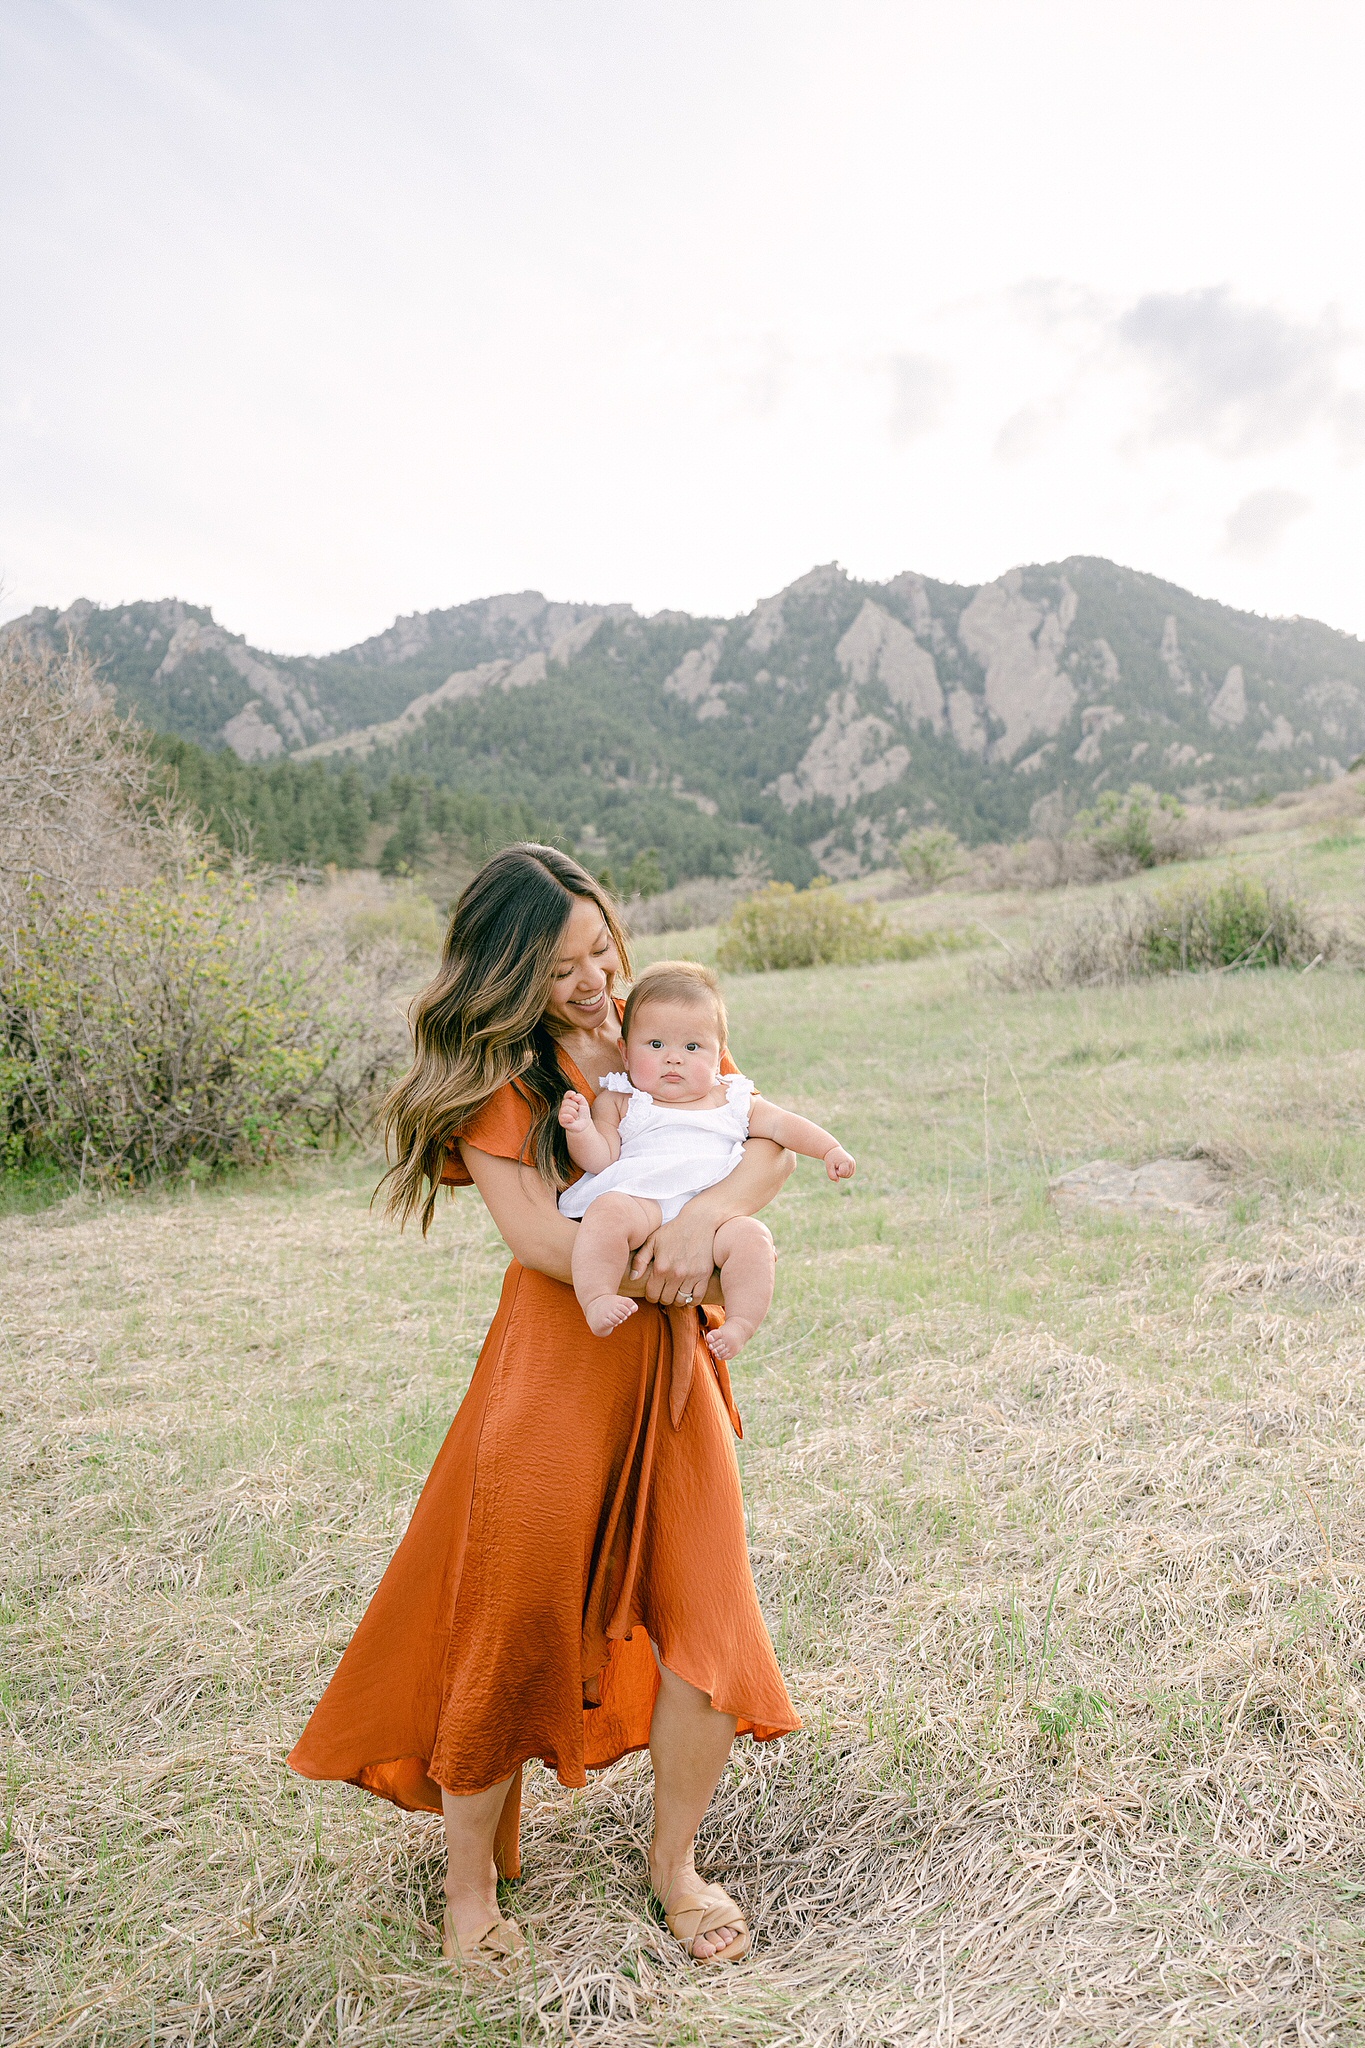 A young mother holding her six month baby during a photo session in Boulder, Colorado with mountains in the background.